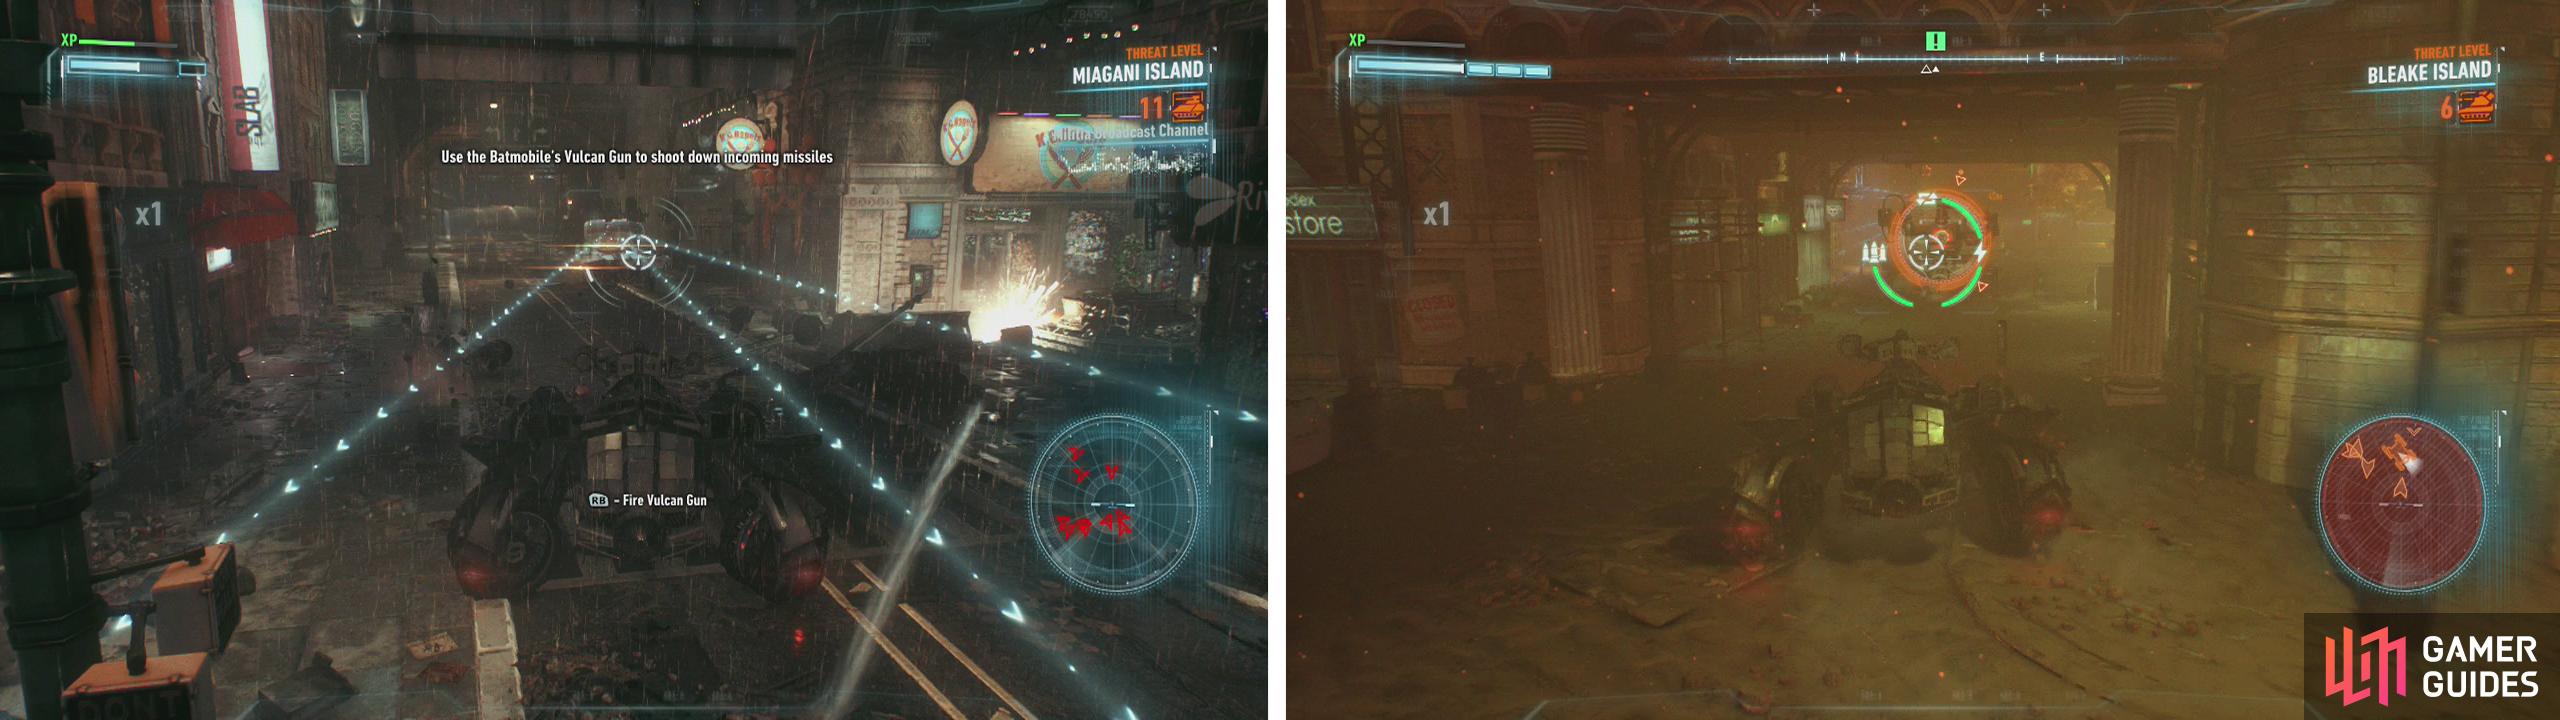 The Diamondback fires three projectiles at once (left). The Cobras can be destroyed by a single shot from behind (right).